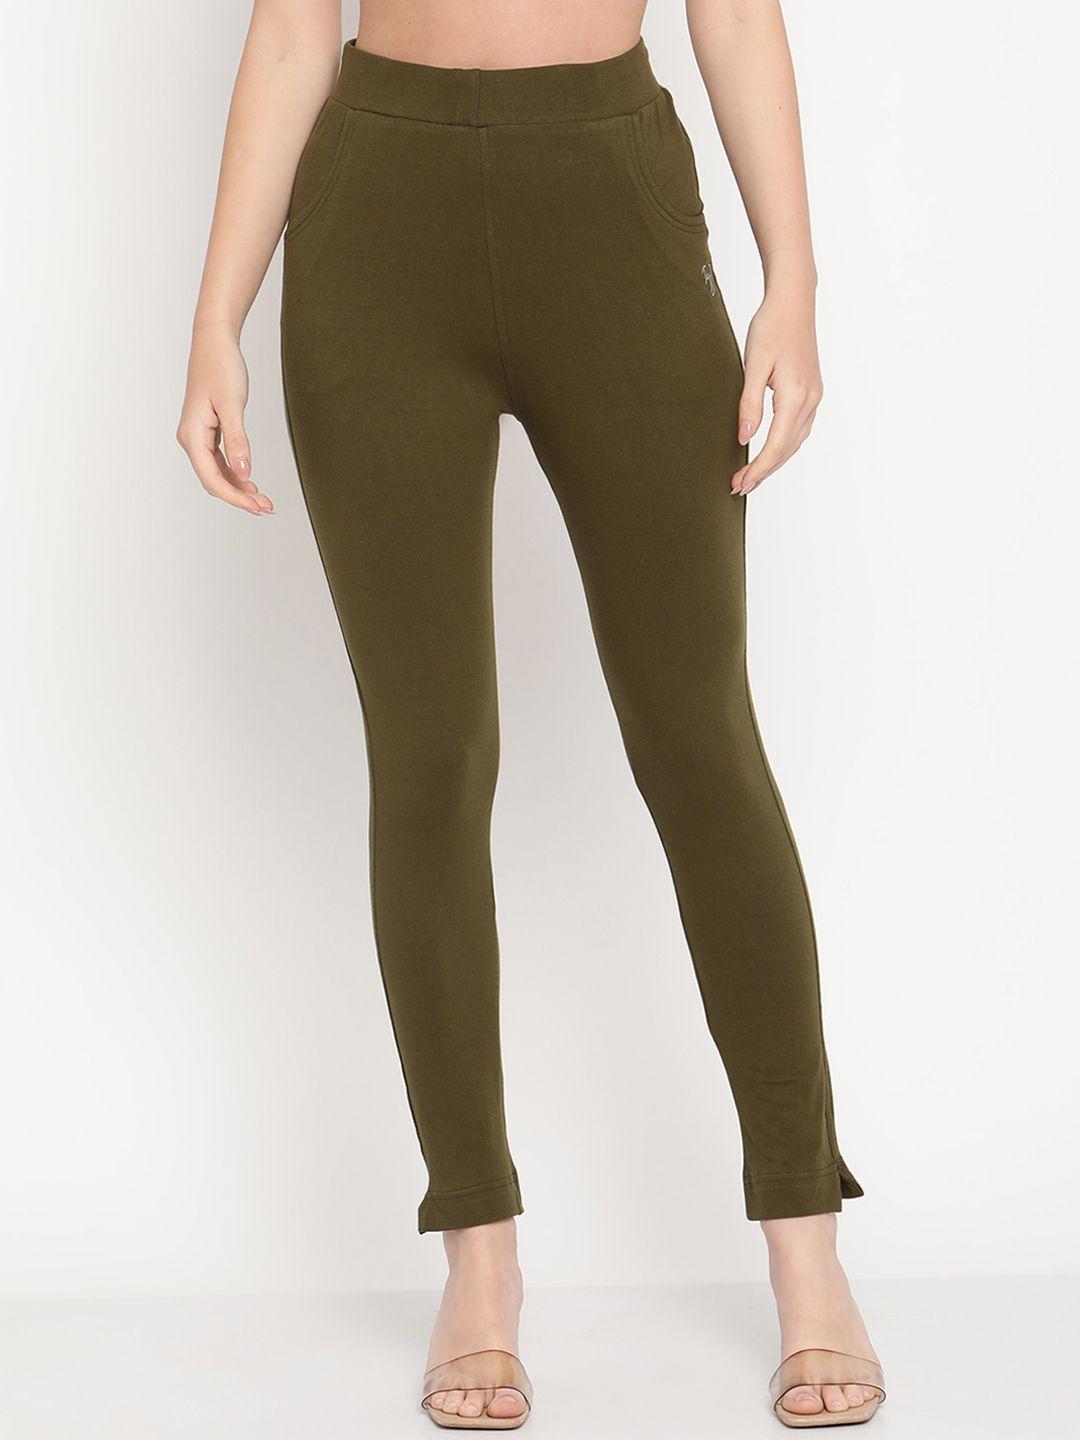 tag 7 women olive green solid ankle-length leggings